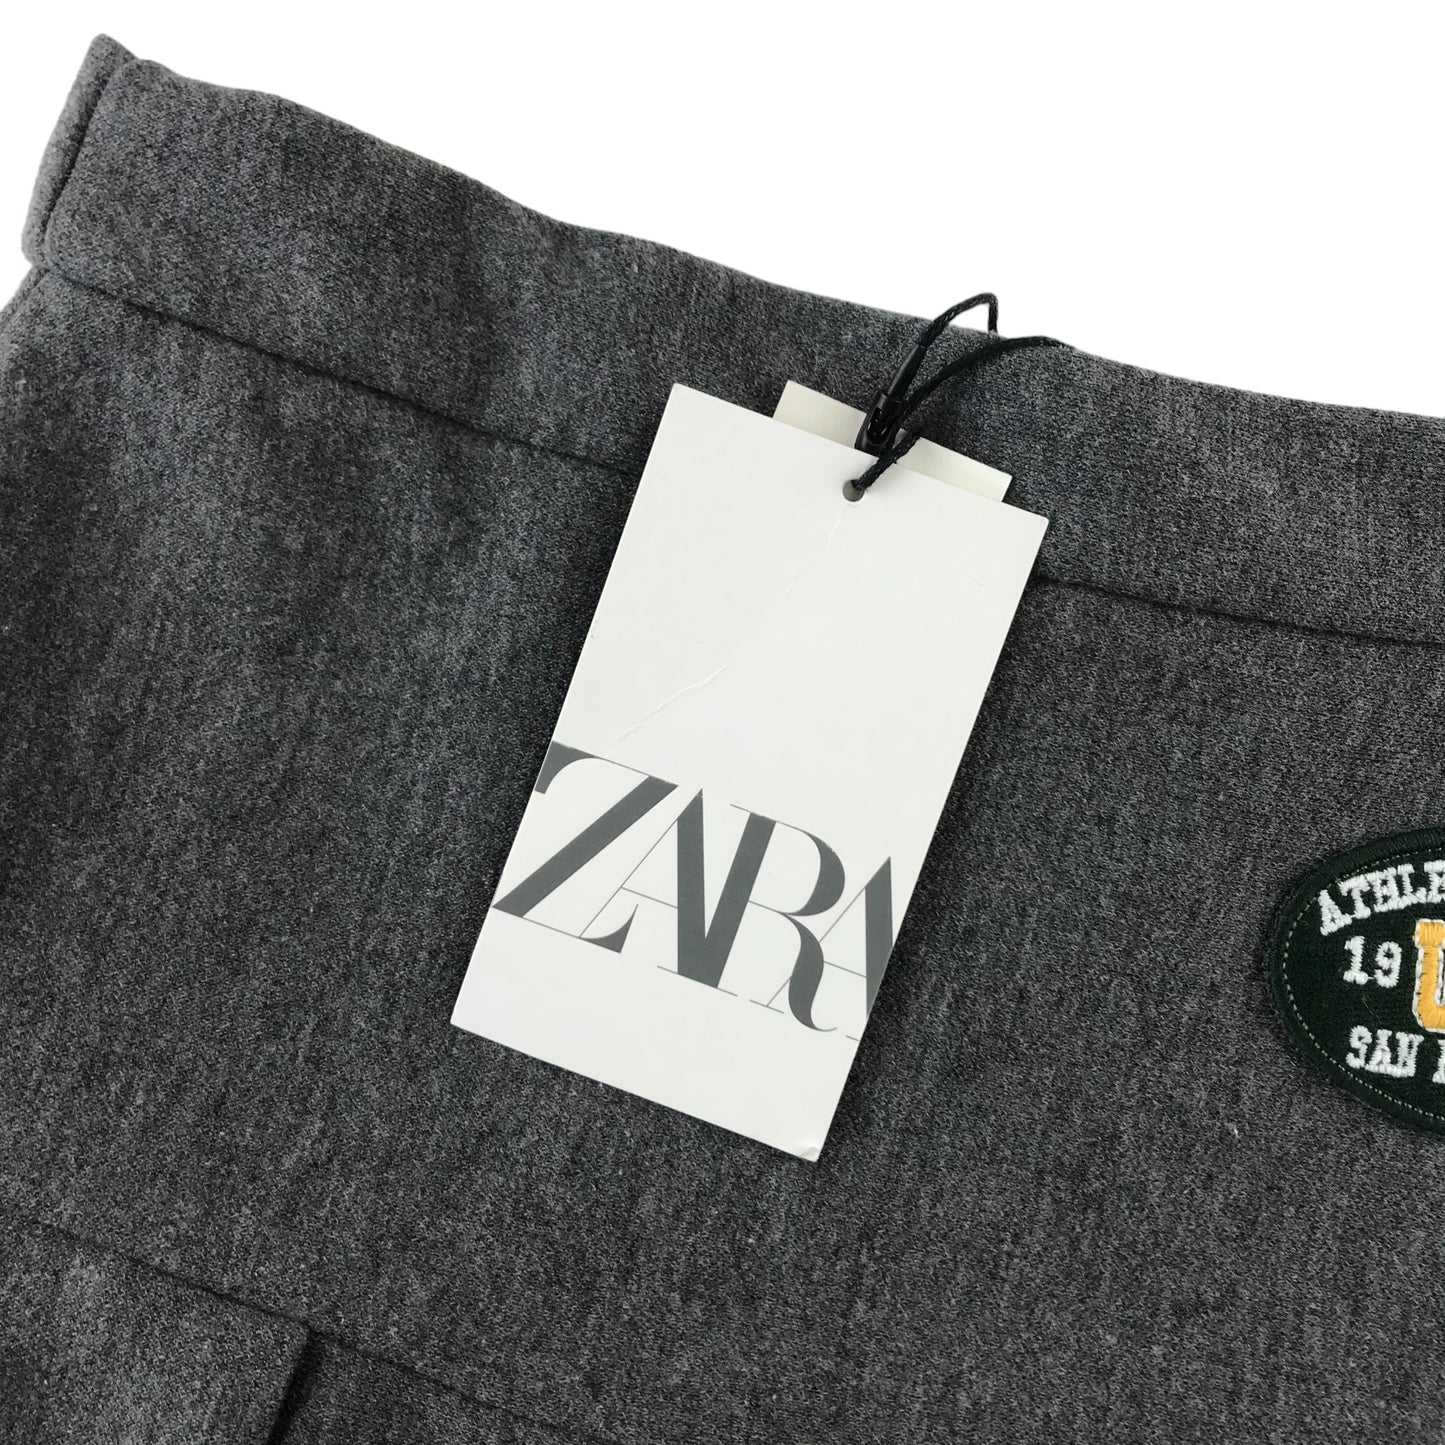 Zara Skirt Age 13 Grey Pleated with Patches Jersey